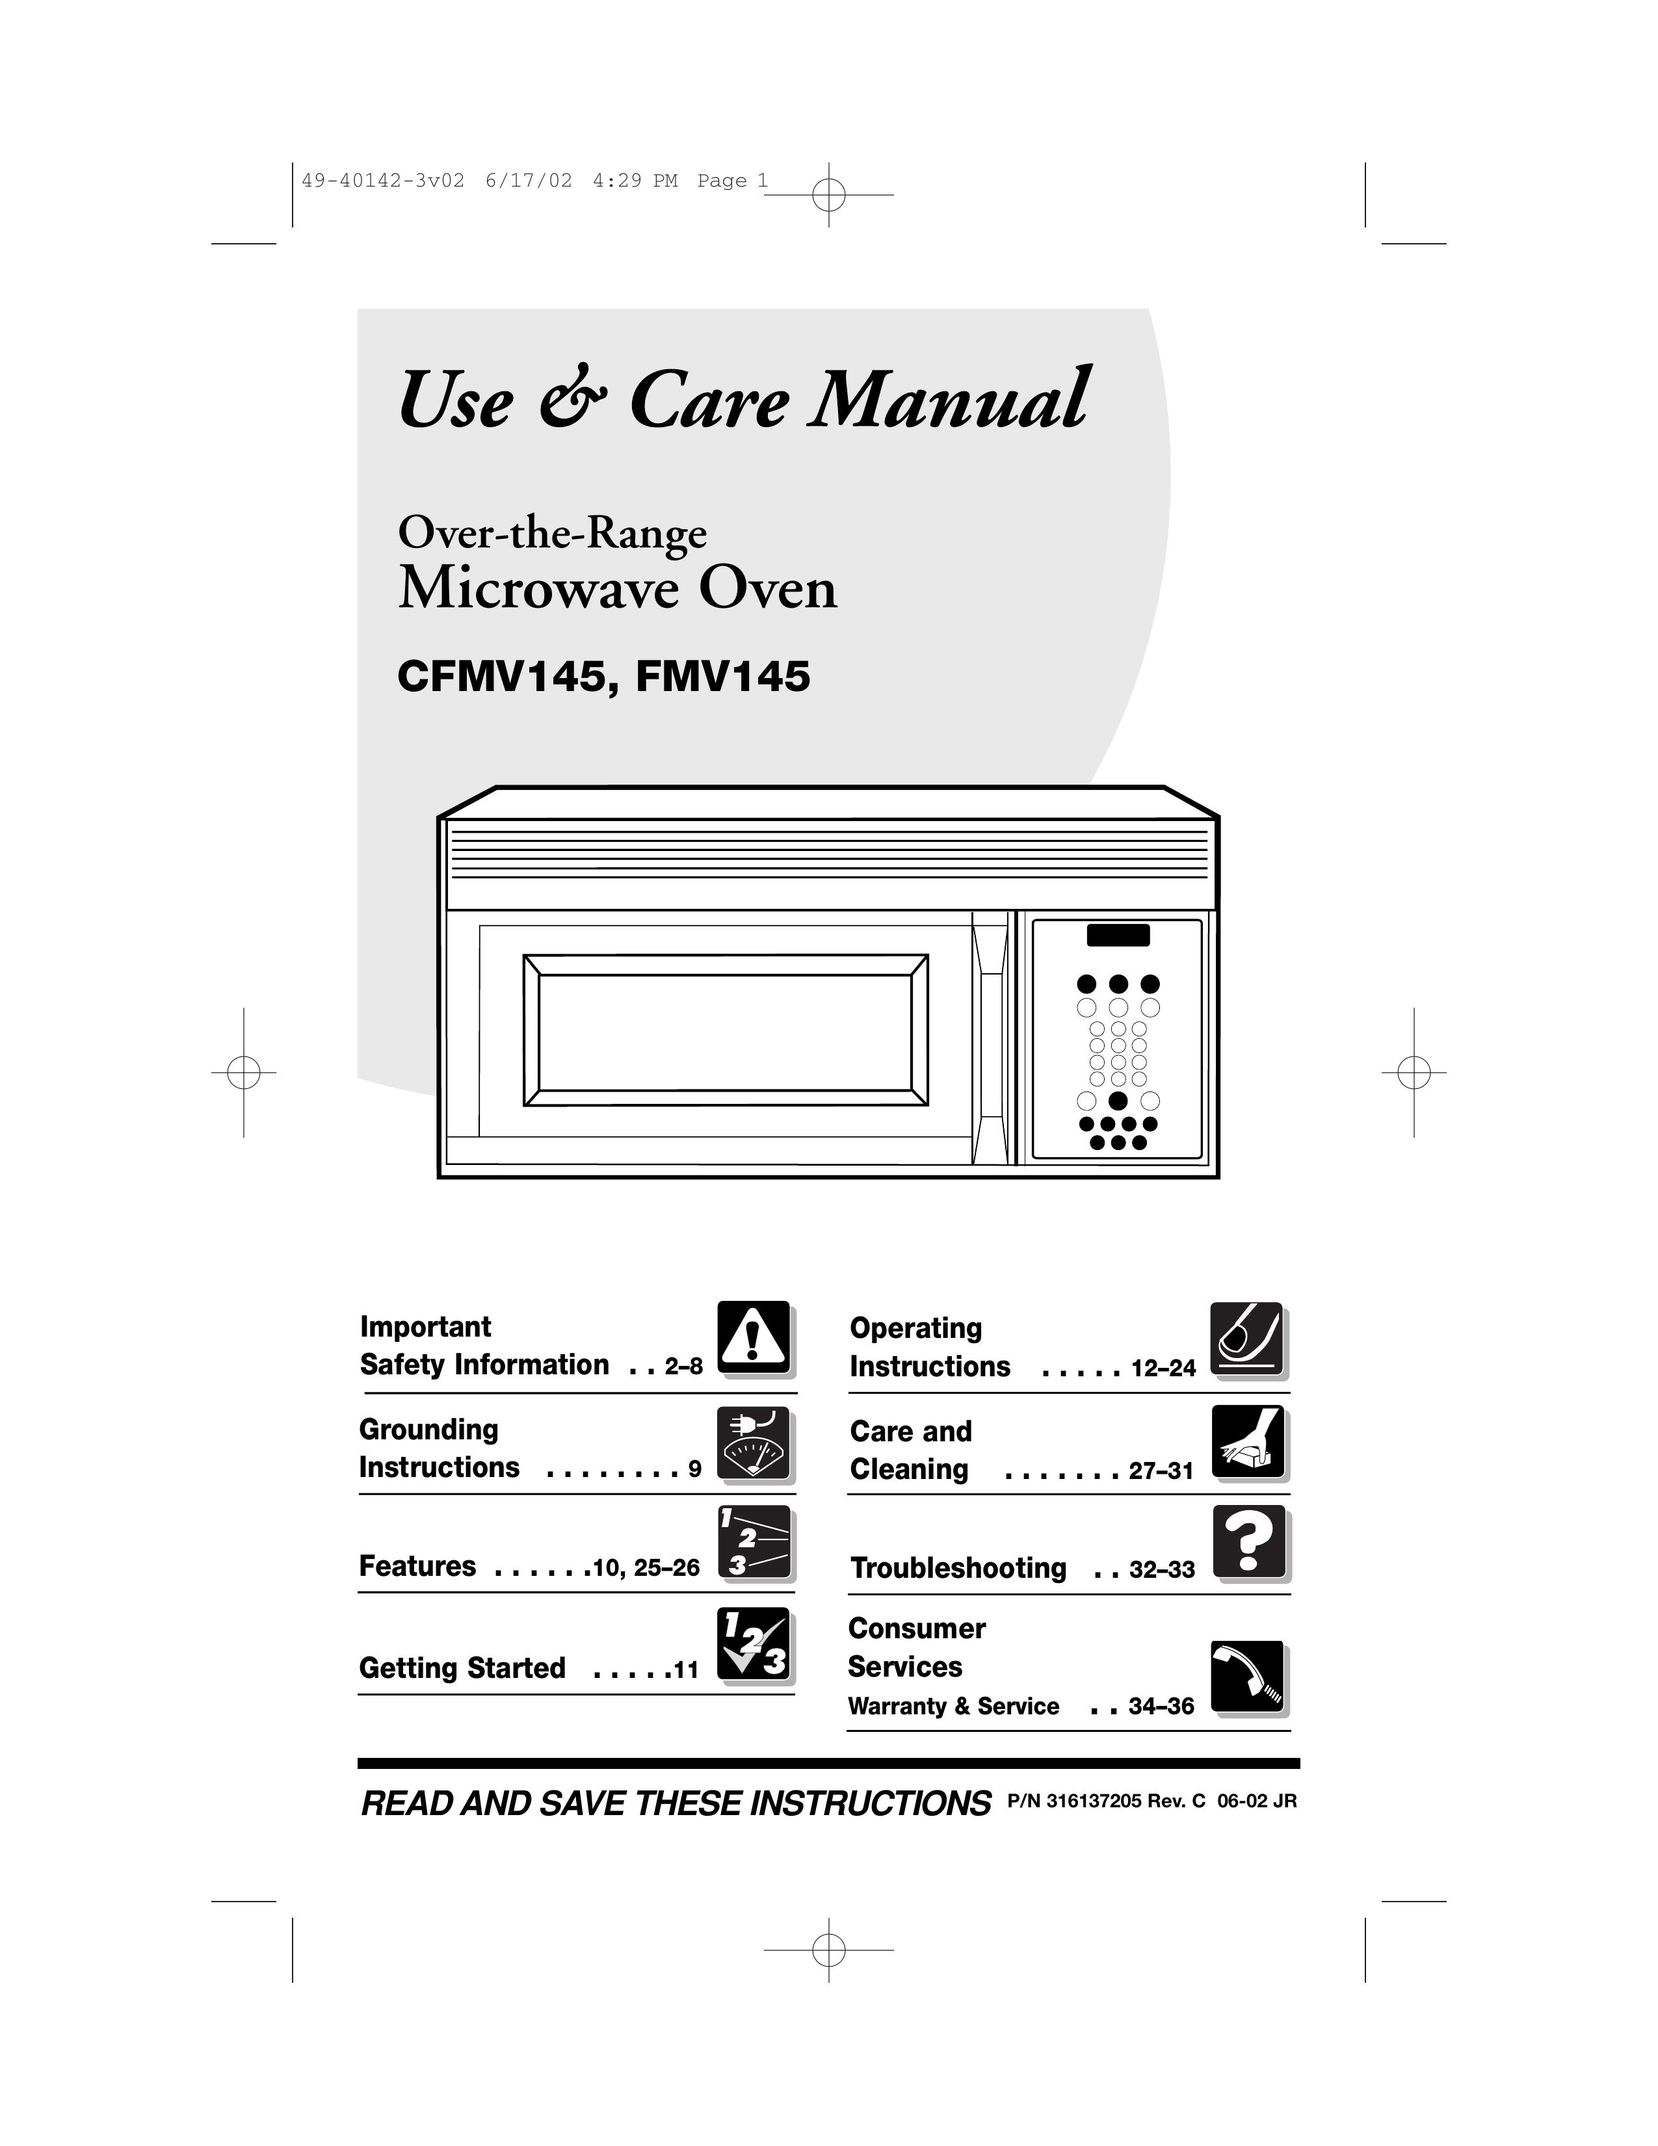 Frigidaire CFMV145 Microwave Oven User Manual